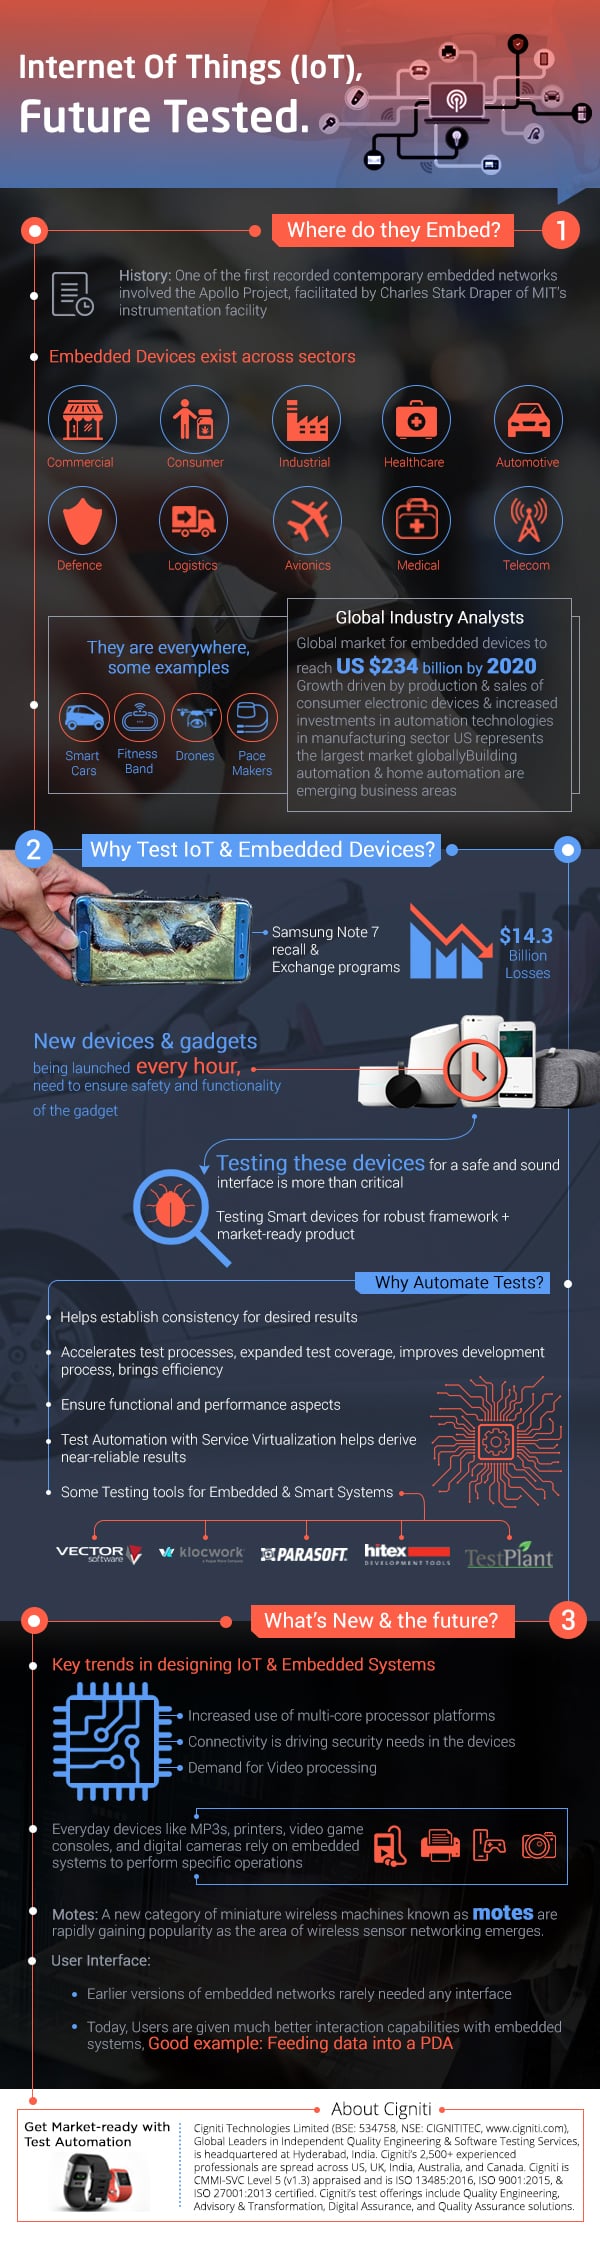 Internet Of Things (IoT), Future Tested